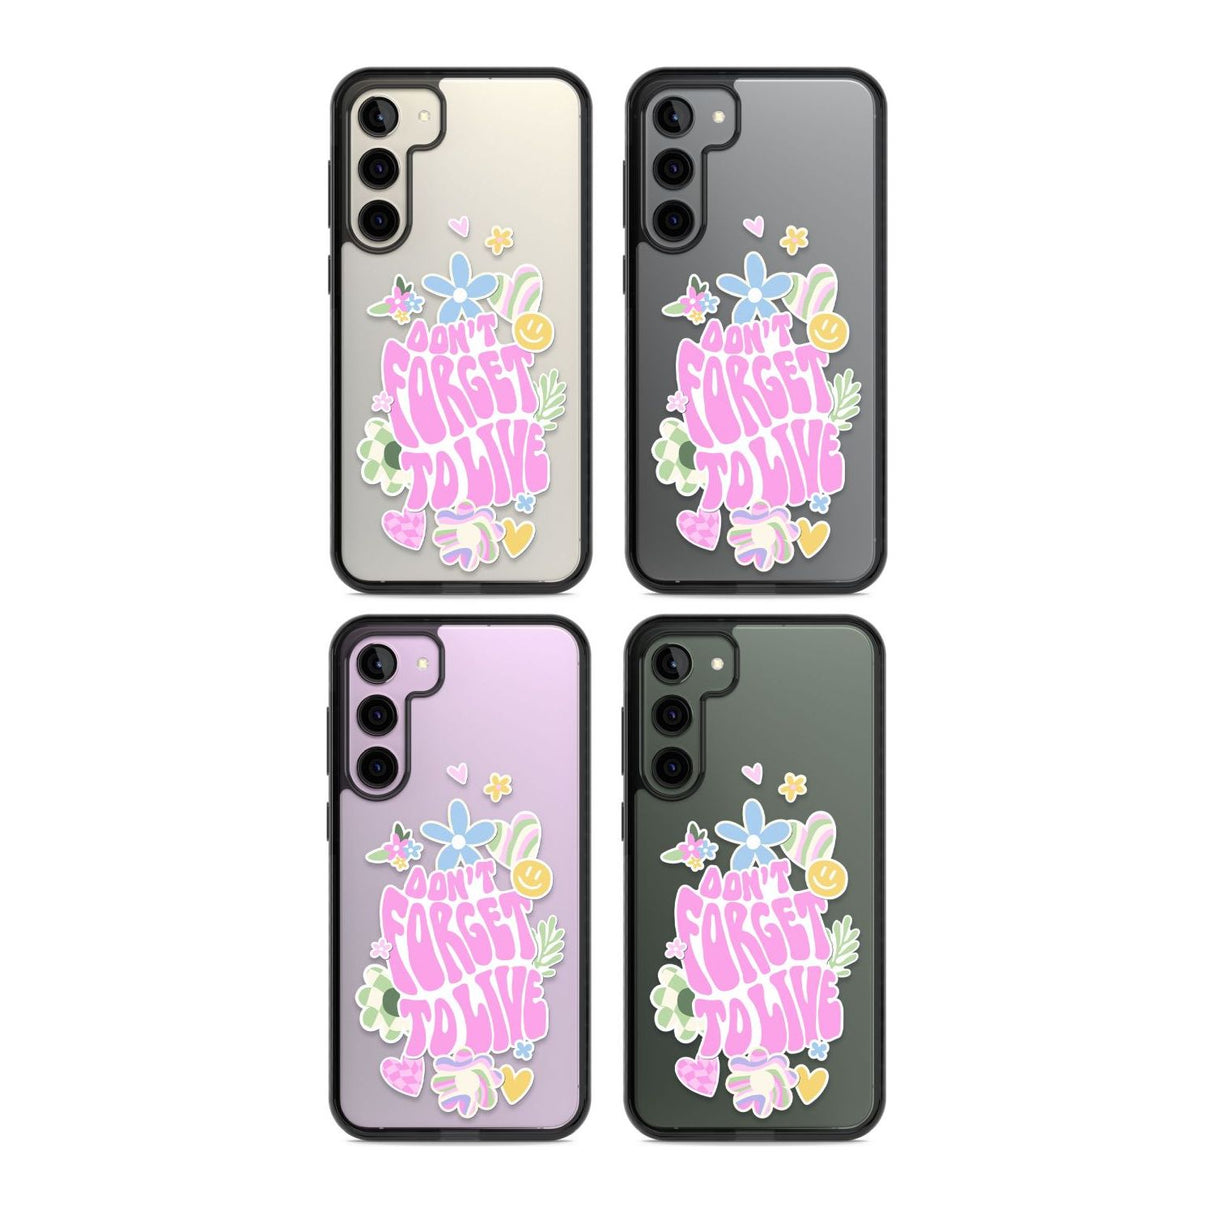 Don't Forget To Live Phone Case iPhone 15 Pro Max / Black Impact Case,iPhone 15 Plus / Black Impact Case,iPhone 15 Pro / Black Impact Case,iPhone 15 / Black Impact Case,iPhone 15 Pro Max / Impact Case,iPhone 15 Plus / Impact Case,iPhone 15 Pro / Impact Case,iPhone 15 / Impact Case,iPhone 15 Pro Max / Magsafe Black Impact Case,iPhone 15 Plus / Magsafe Black Impact Case,iPhone 15 Pro / Magsafe Black Impact Case,iPhone 15 / Magsafe Black Impact Case,iPhone 14 Pro Max / Black Impact Case,iPhone 14 Plus / Black 